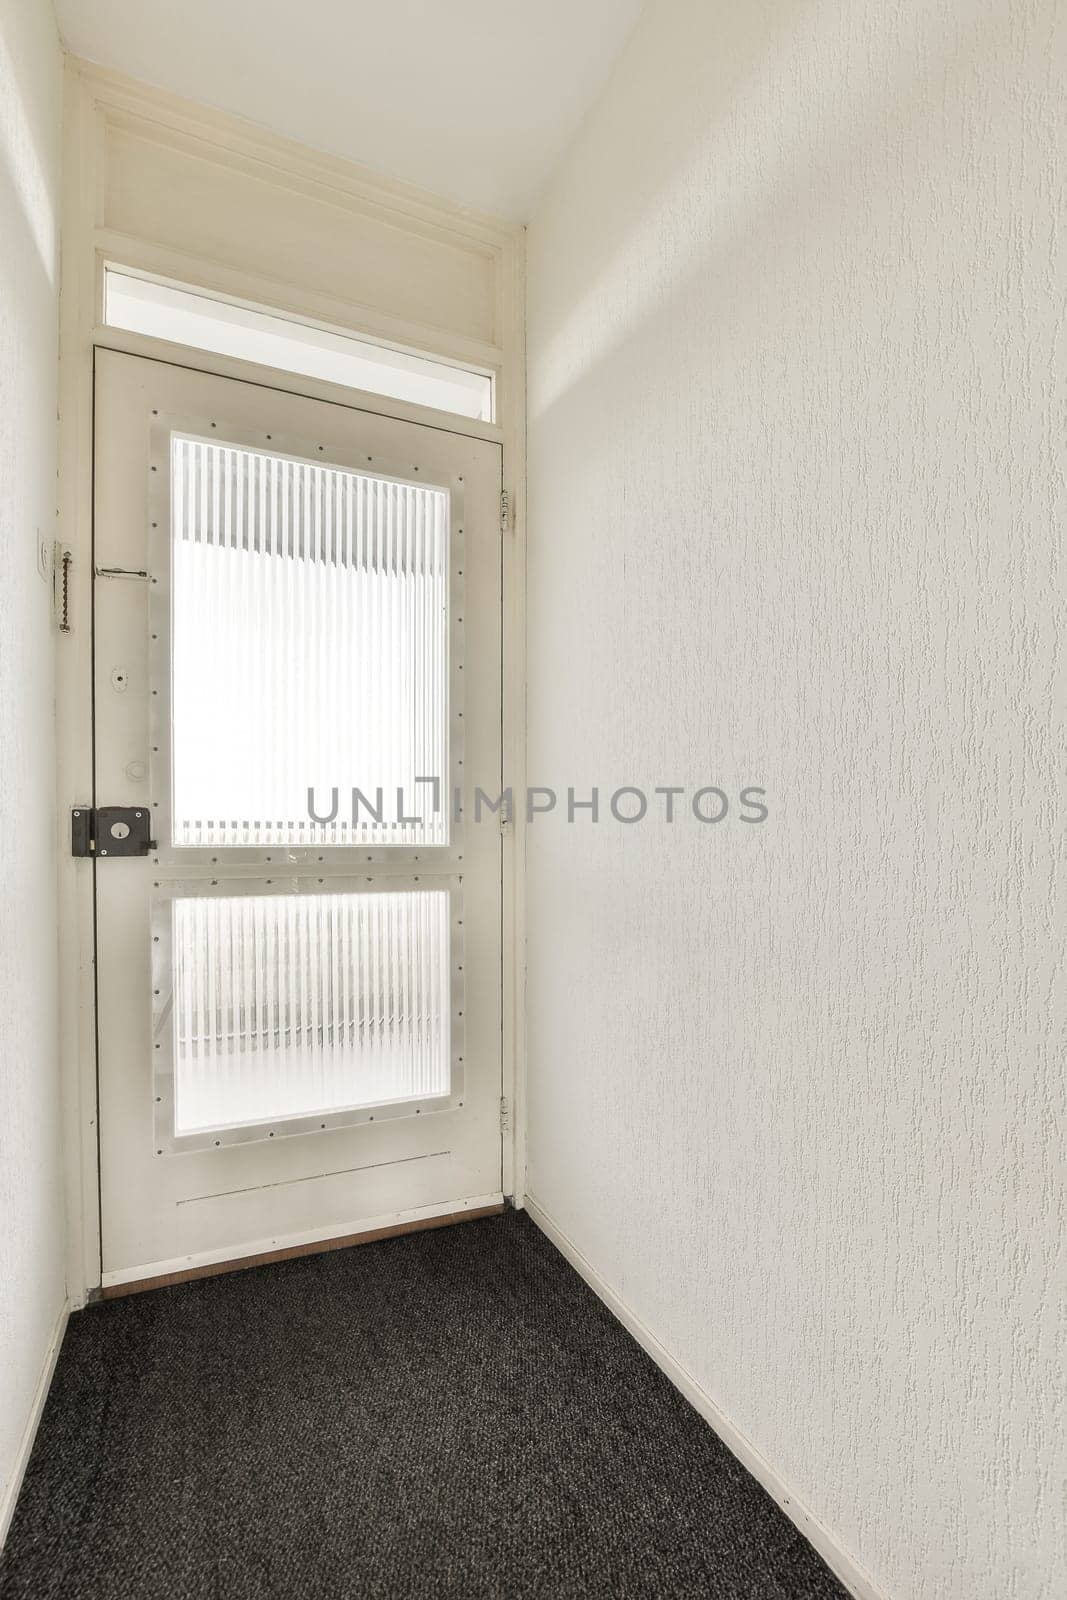 an empty room with white walls and black carpet on the floor, there is a small window in the corner